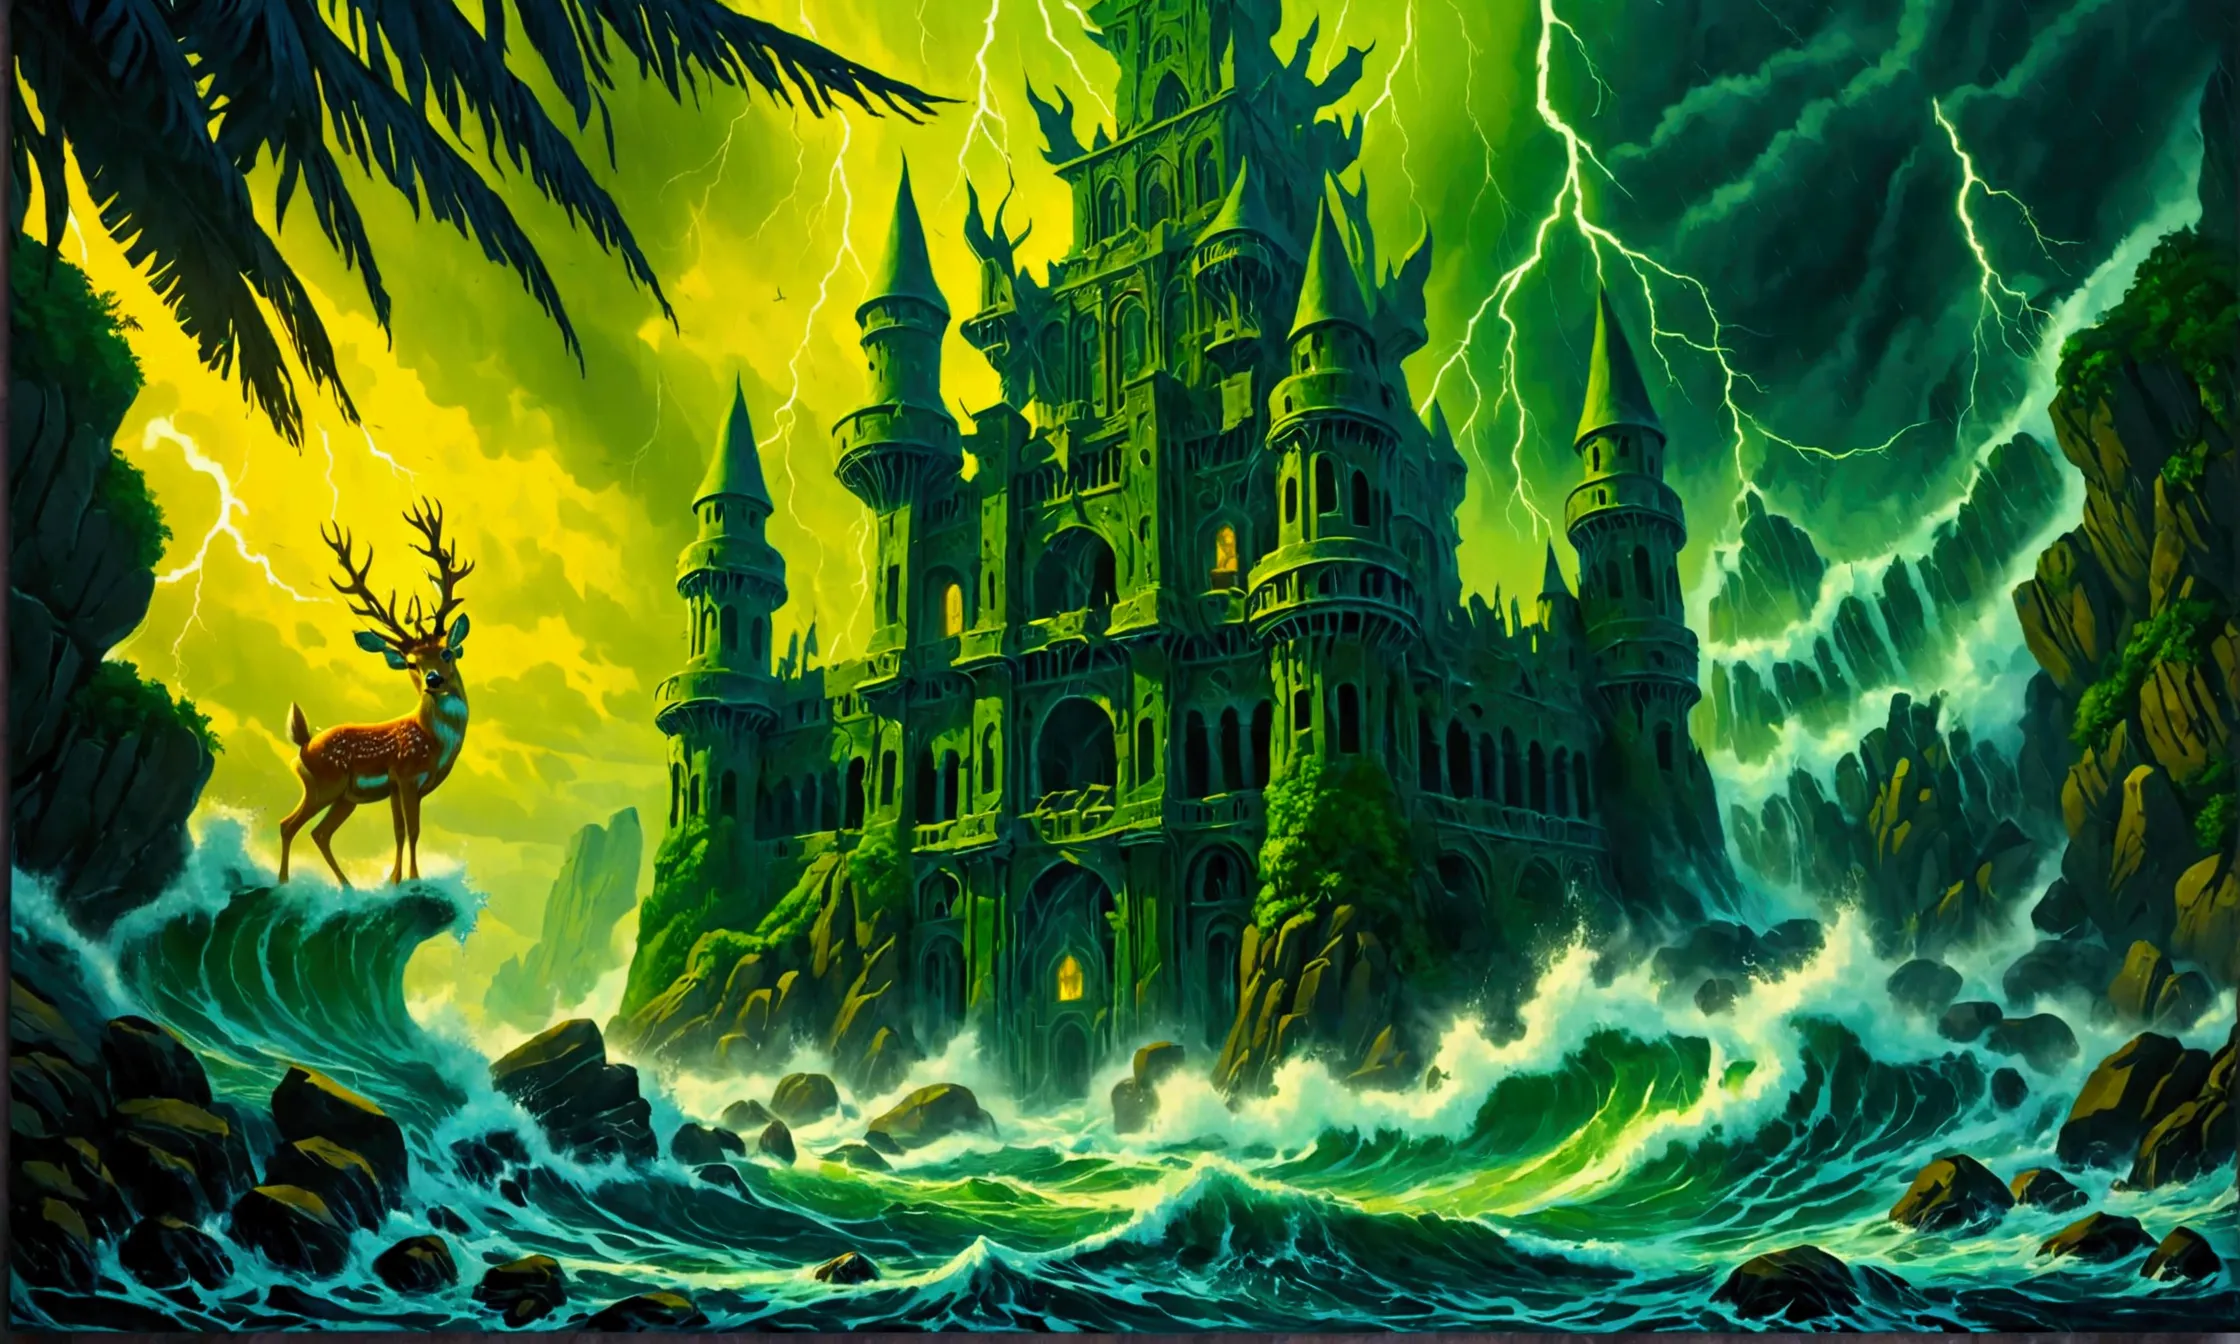 (Mysterious eerie citadel with intricate architecture:1.2) on rocks of tropical island))), crushing waves, yellow-green thunders...